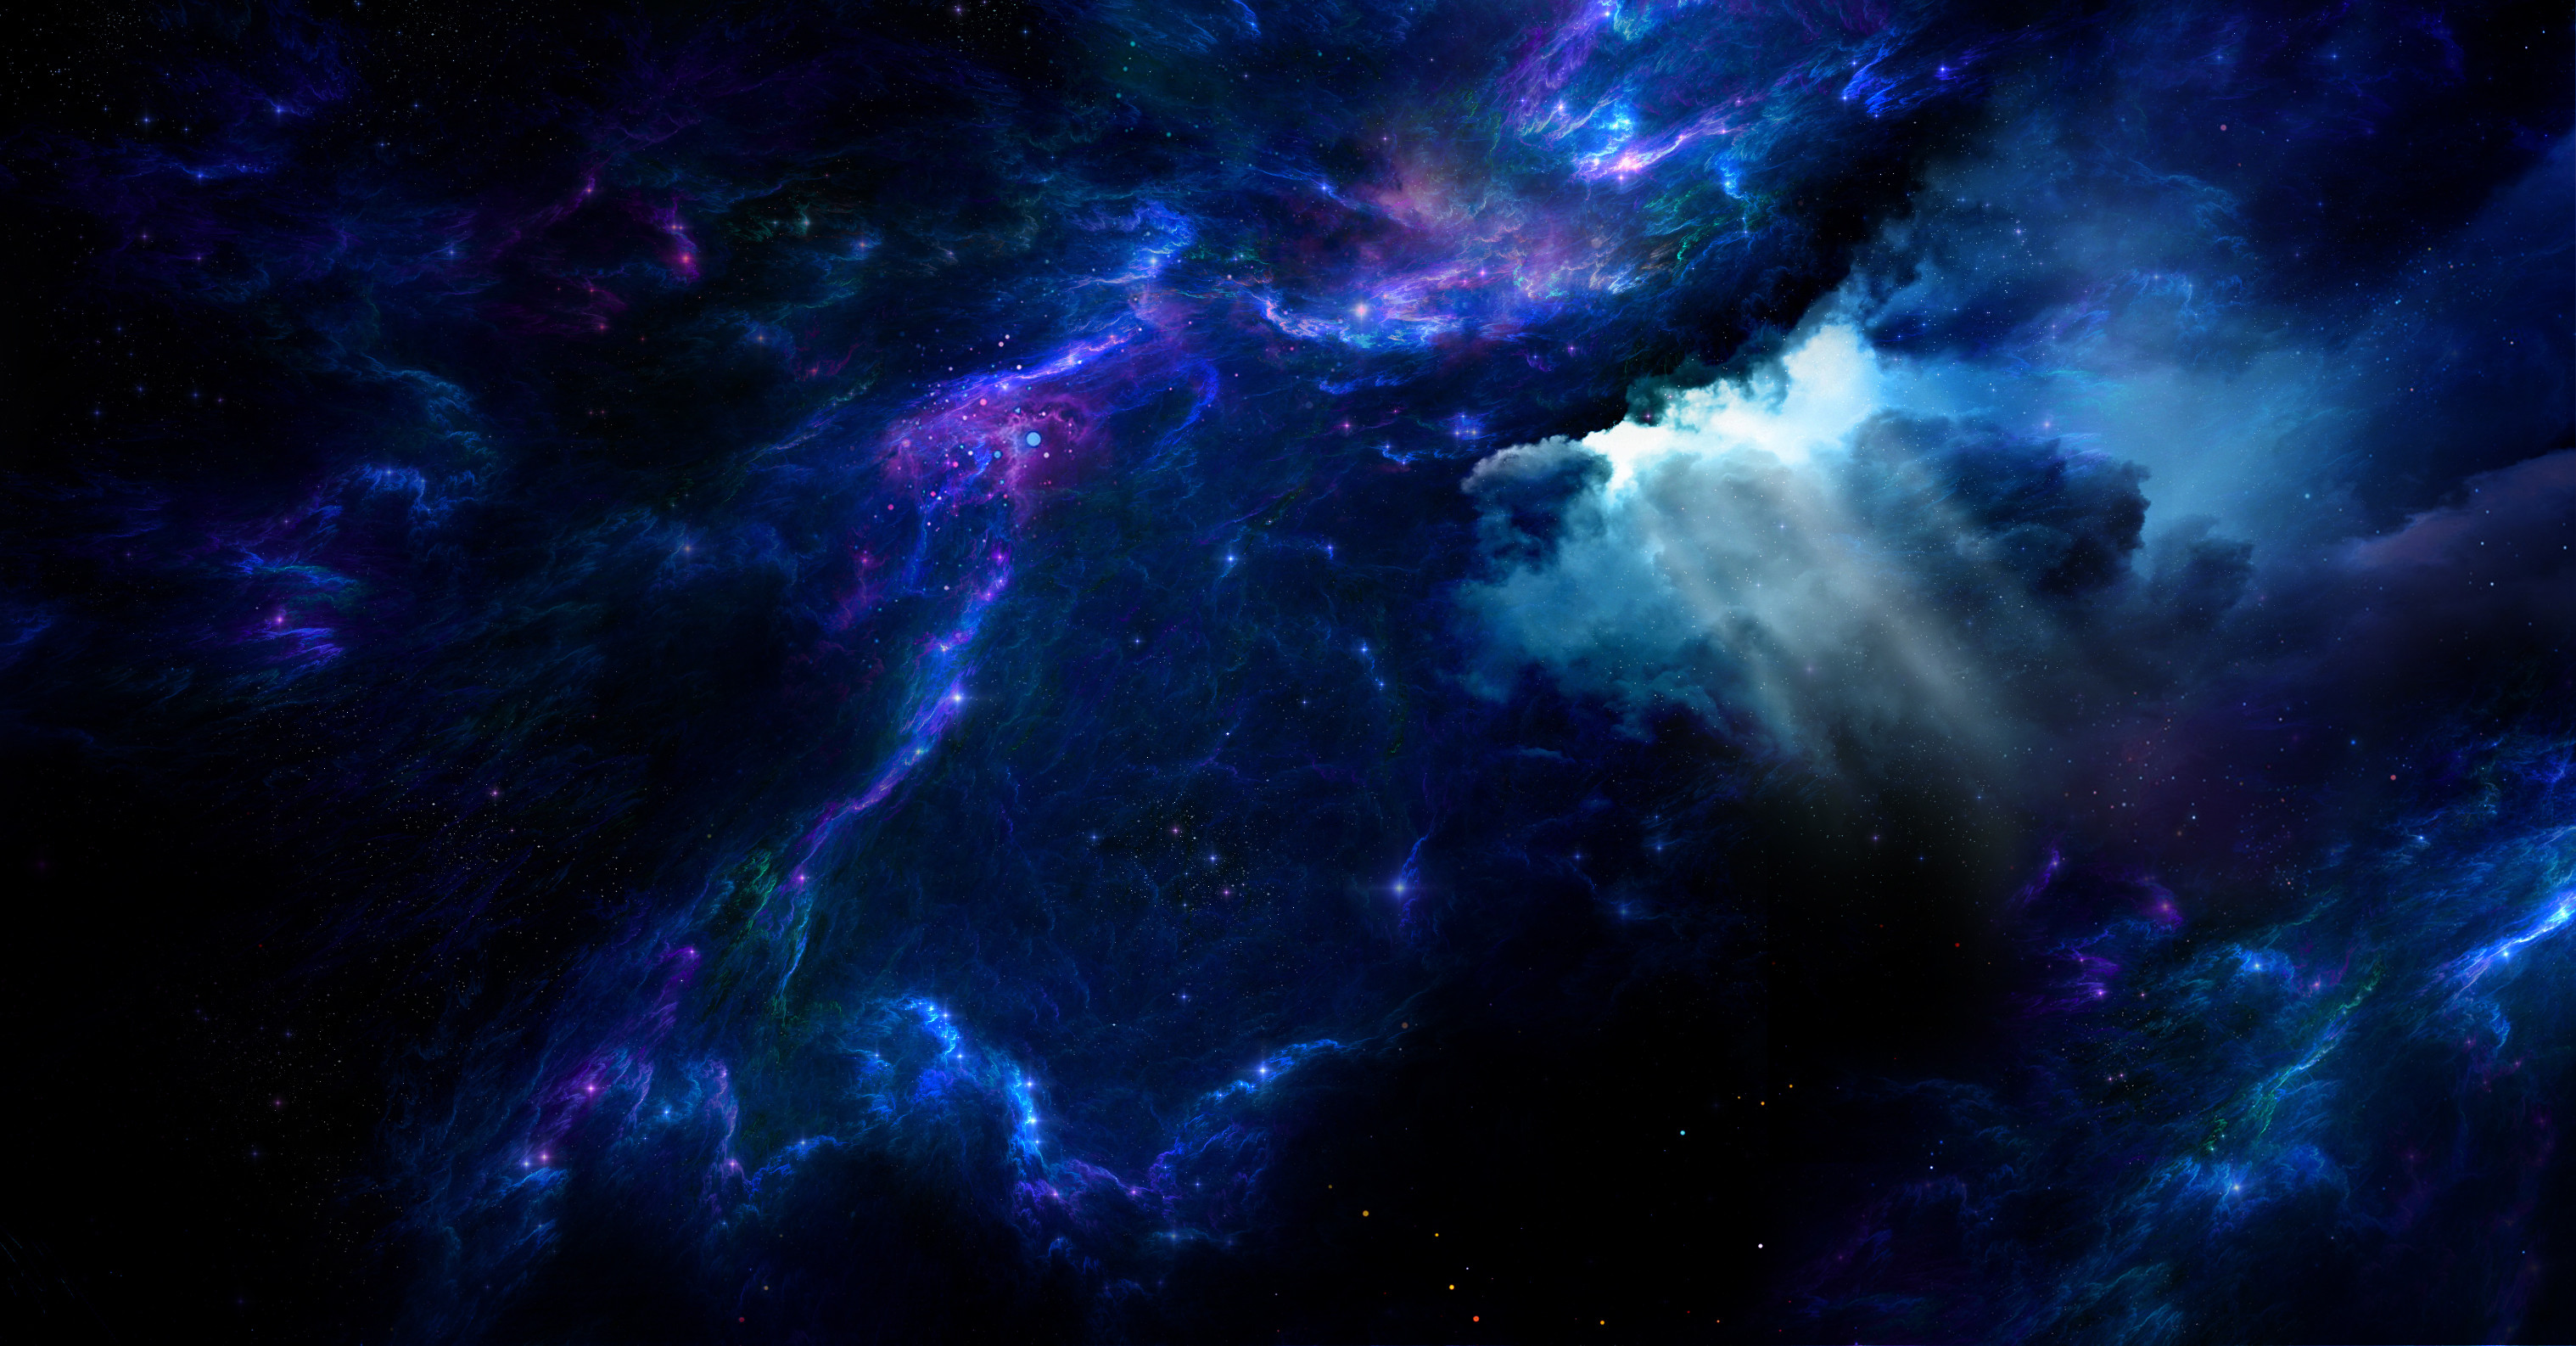 3036x1586 Blue Outer Space Stars Galaxies Planets Earth Nebulae Space Odyssey Space  Art Galaxy Nexus Galaxy Class Nebula Class Galaxy Life Fresh New Hd  Wallpaper ...